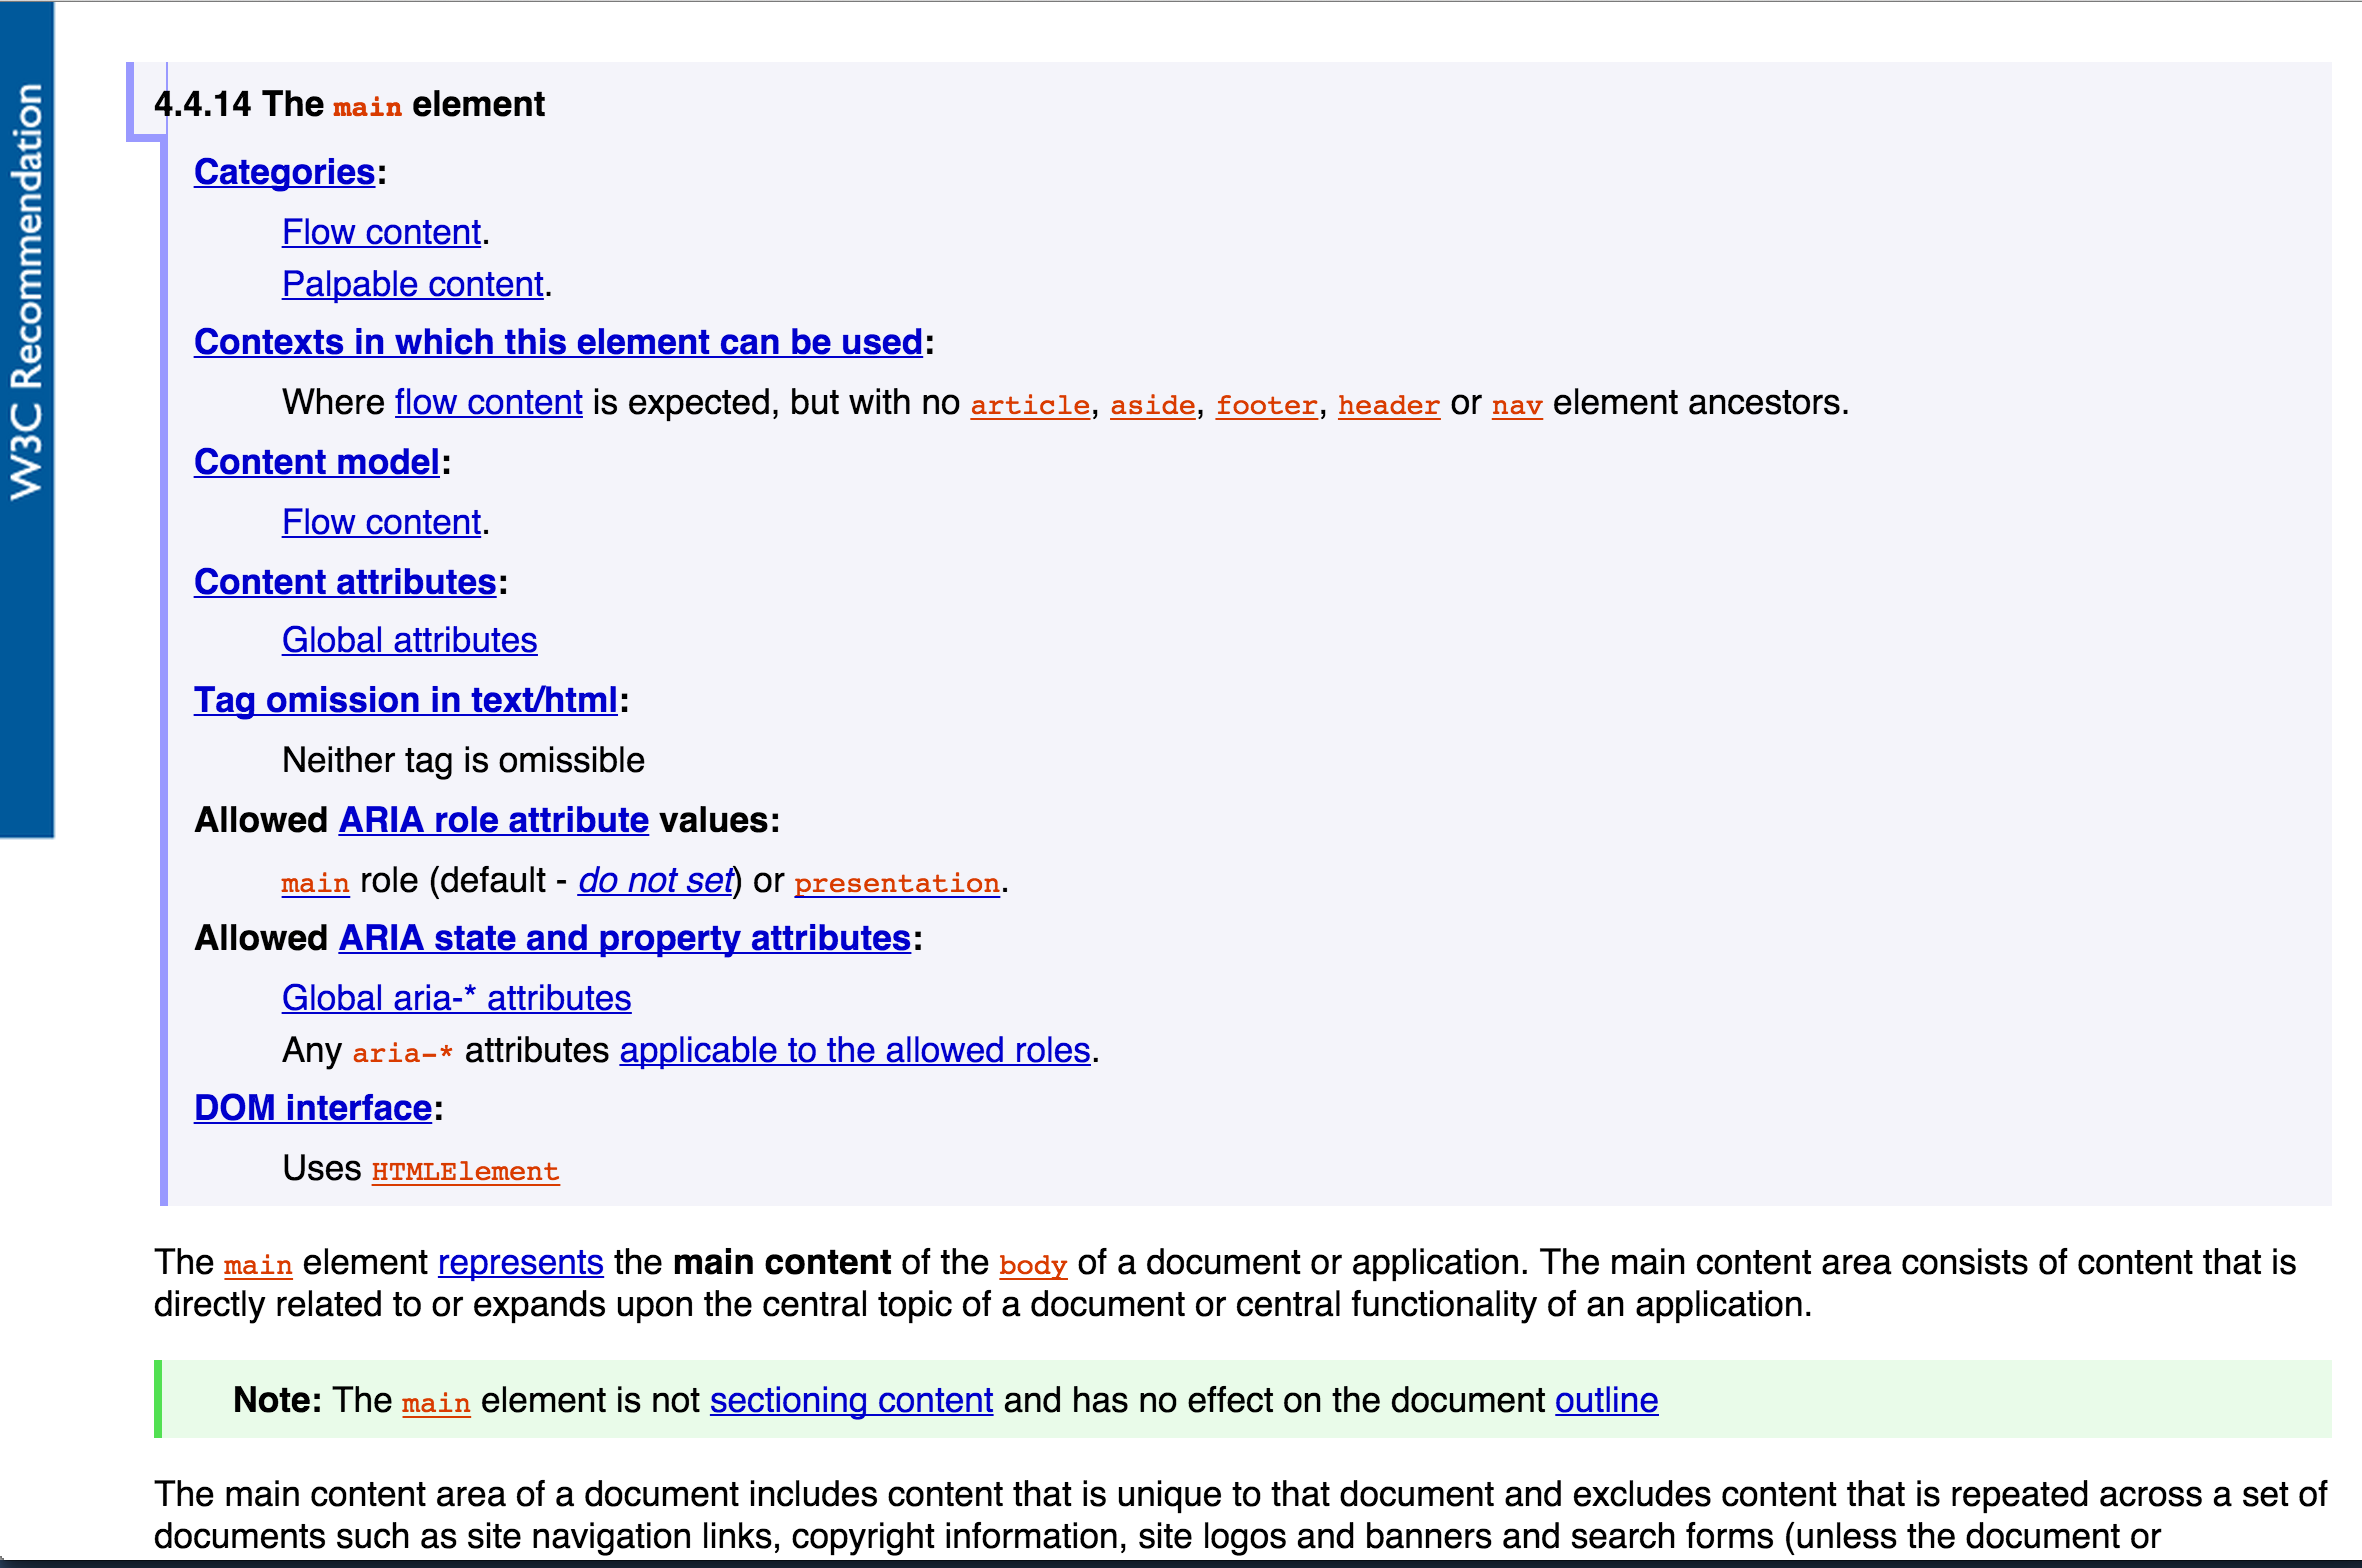 Graphical browser rendering of main element section of W3C HTML 5 Specification